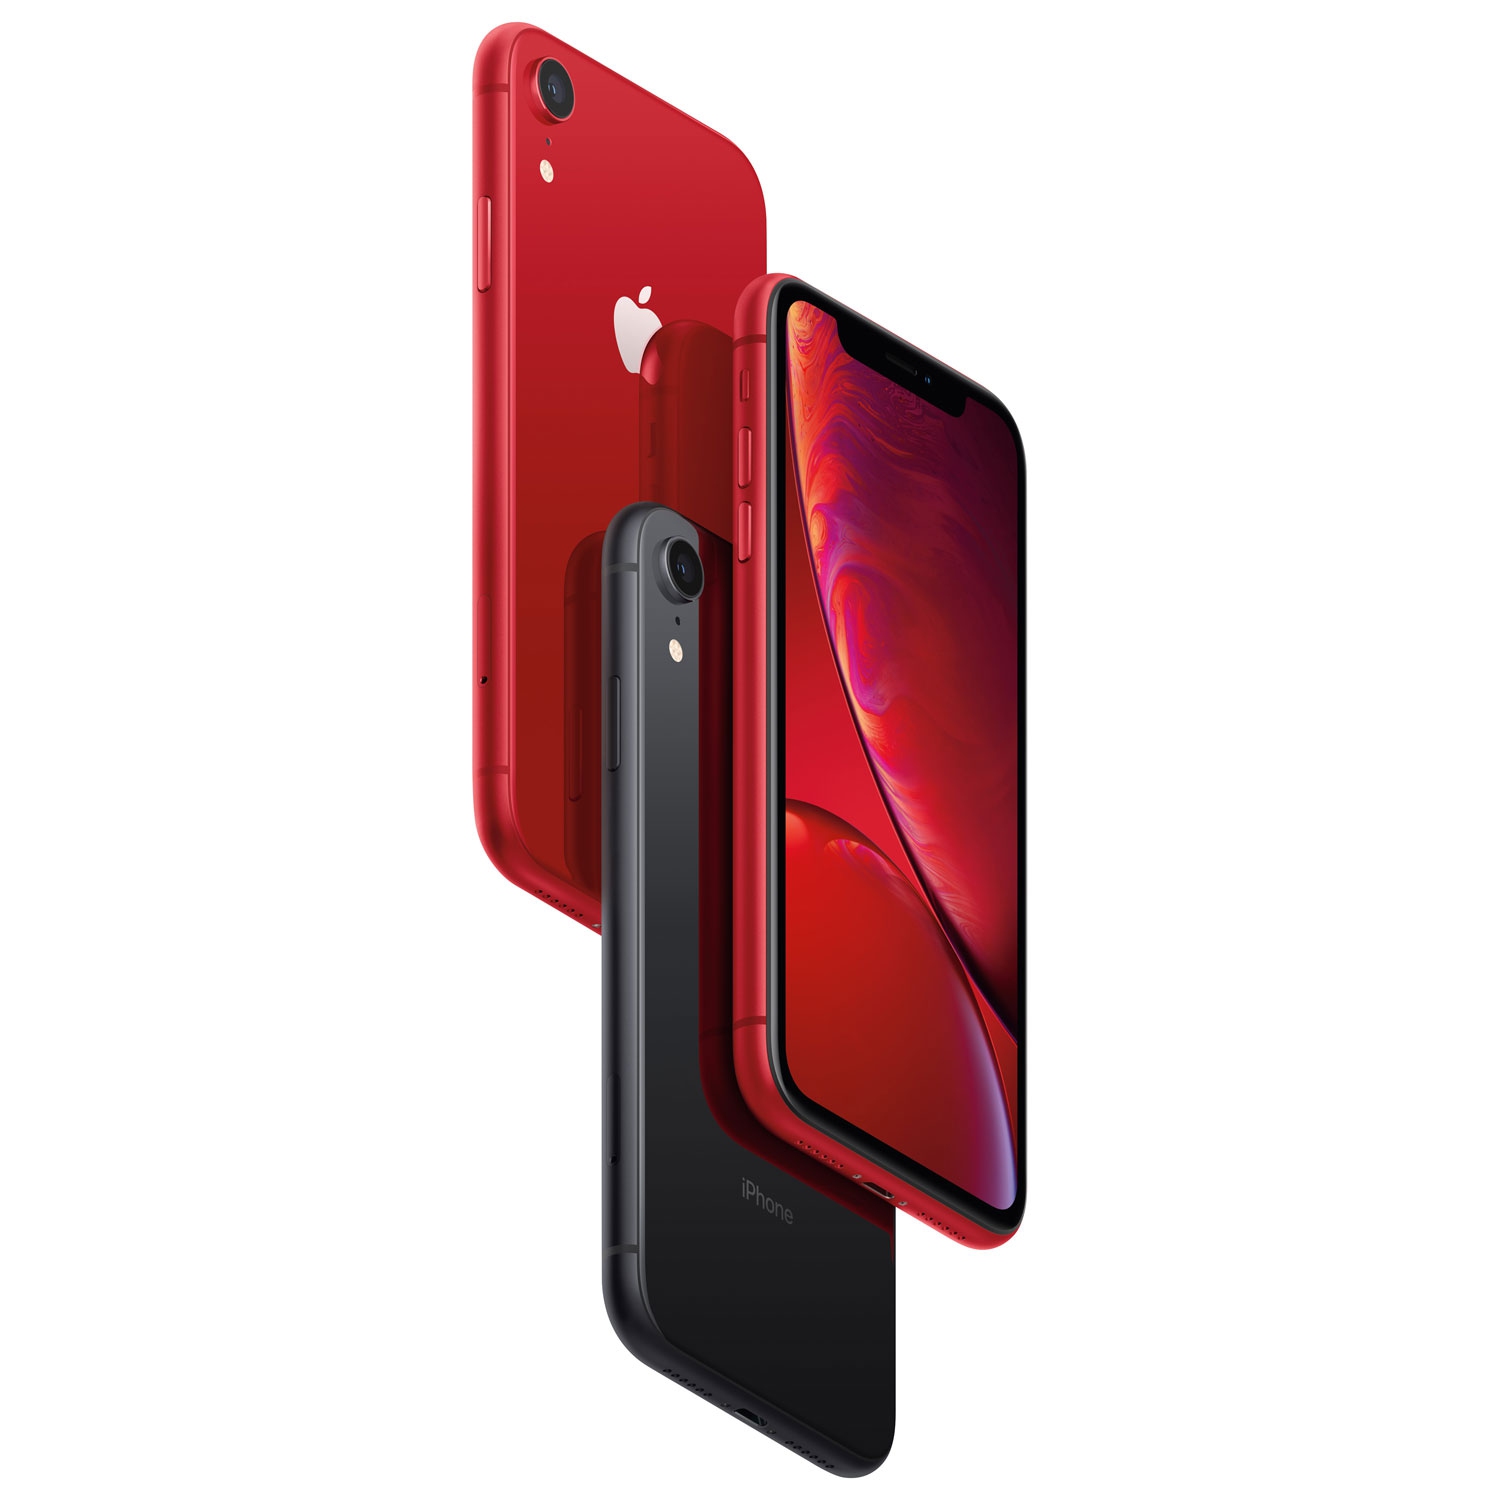 Apple iPhone XR 128GB Smartphone - (Product)RED - Unlocked - Open Box